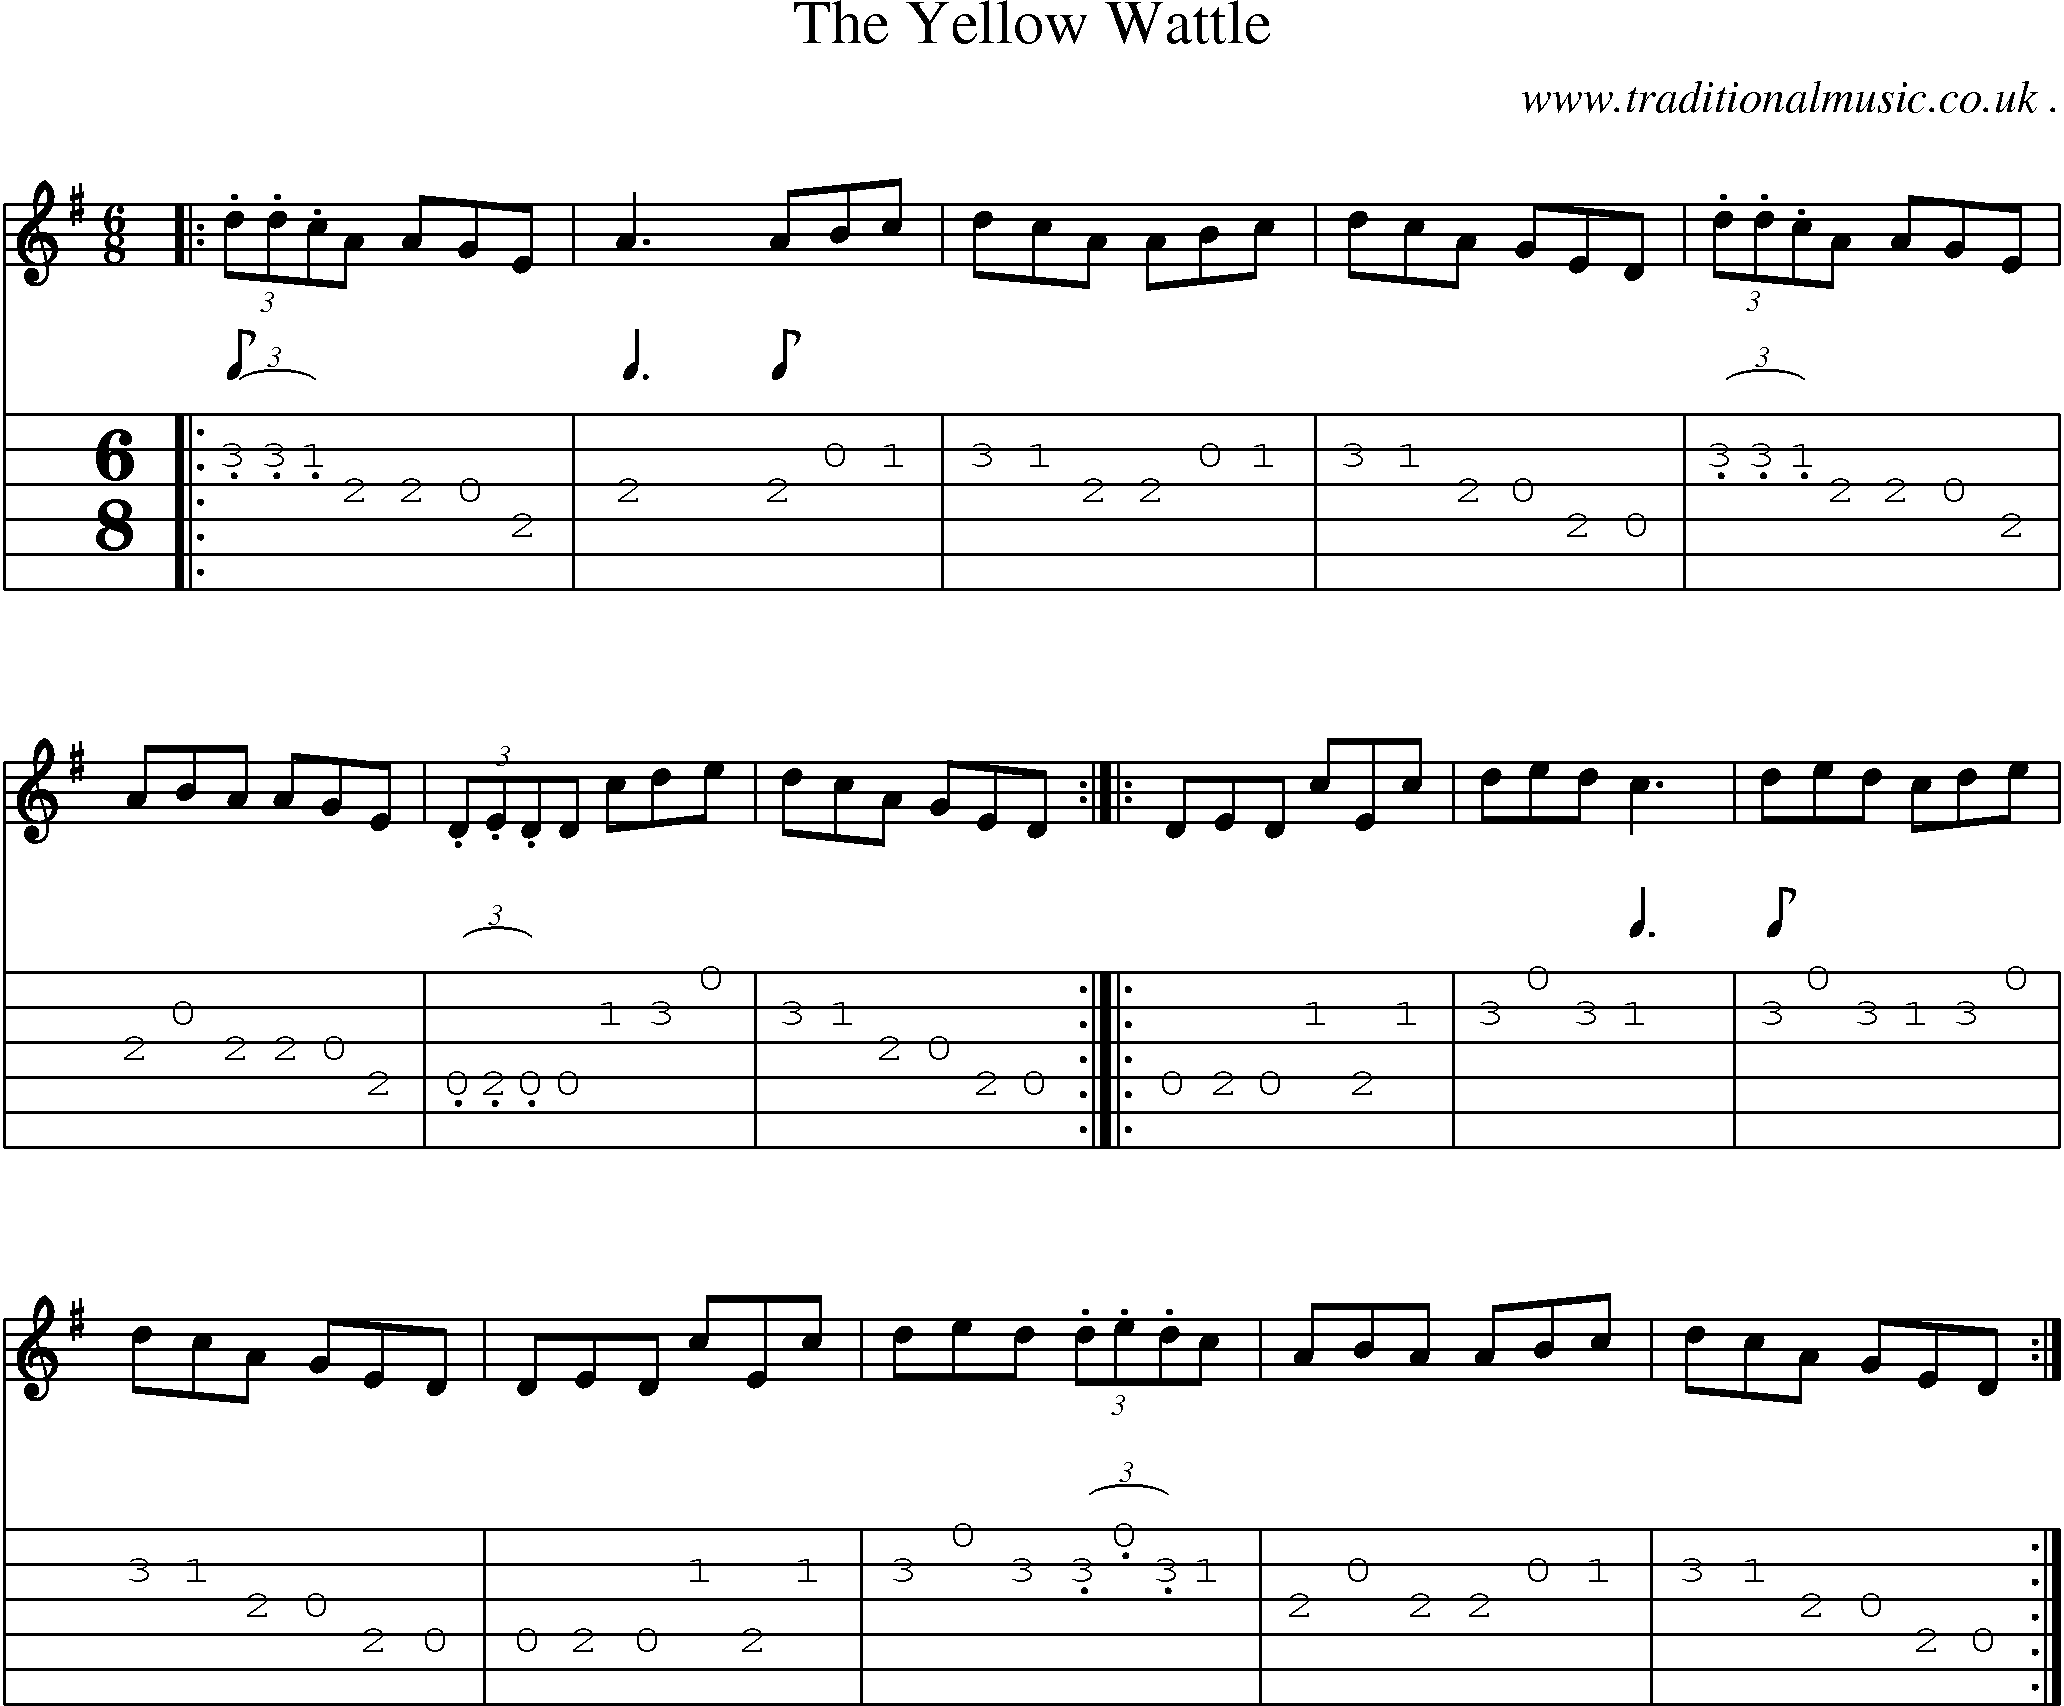 Sheet-Music and Guitar Tabs for The Yellow Wattle